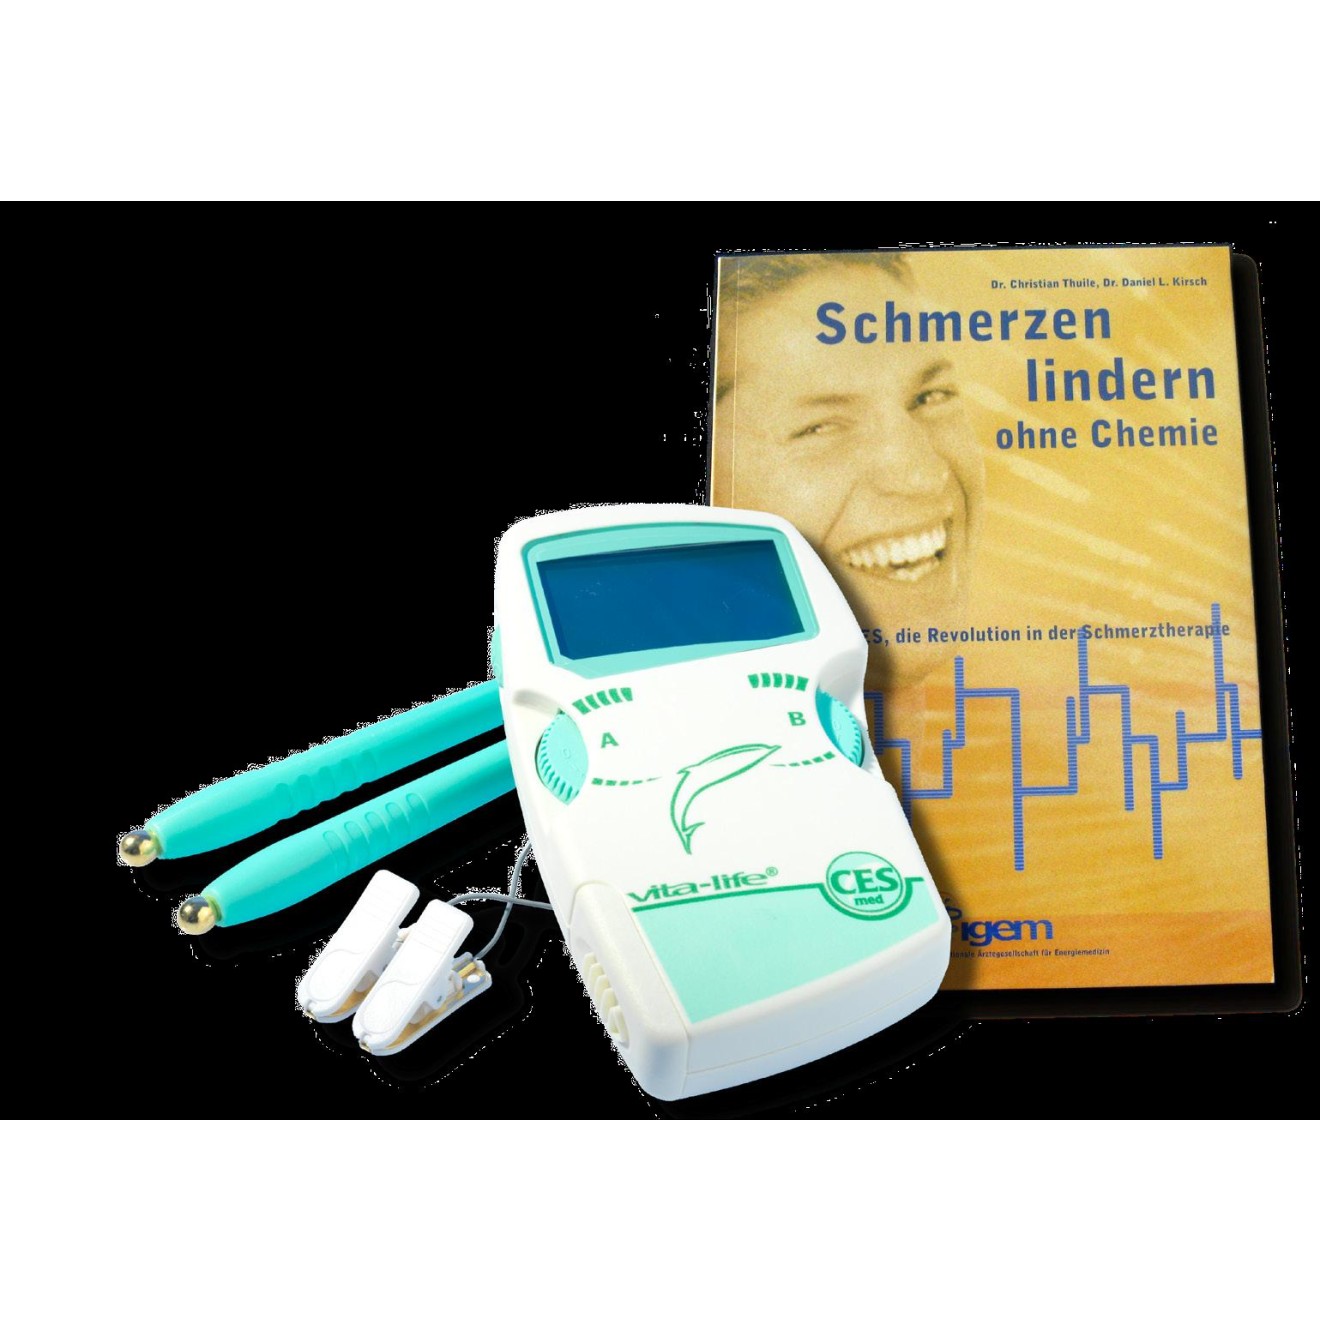 CES - Cranial Electrotherapy Stimulation